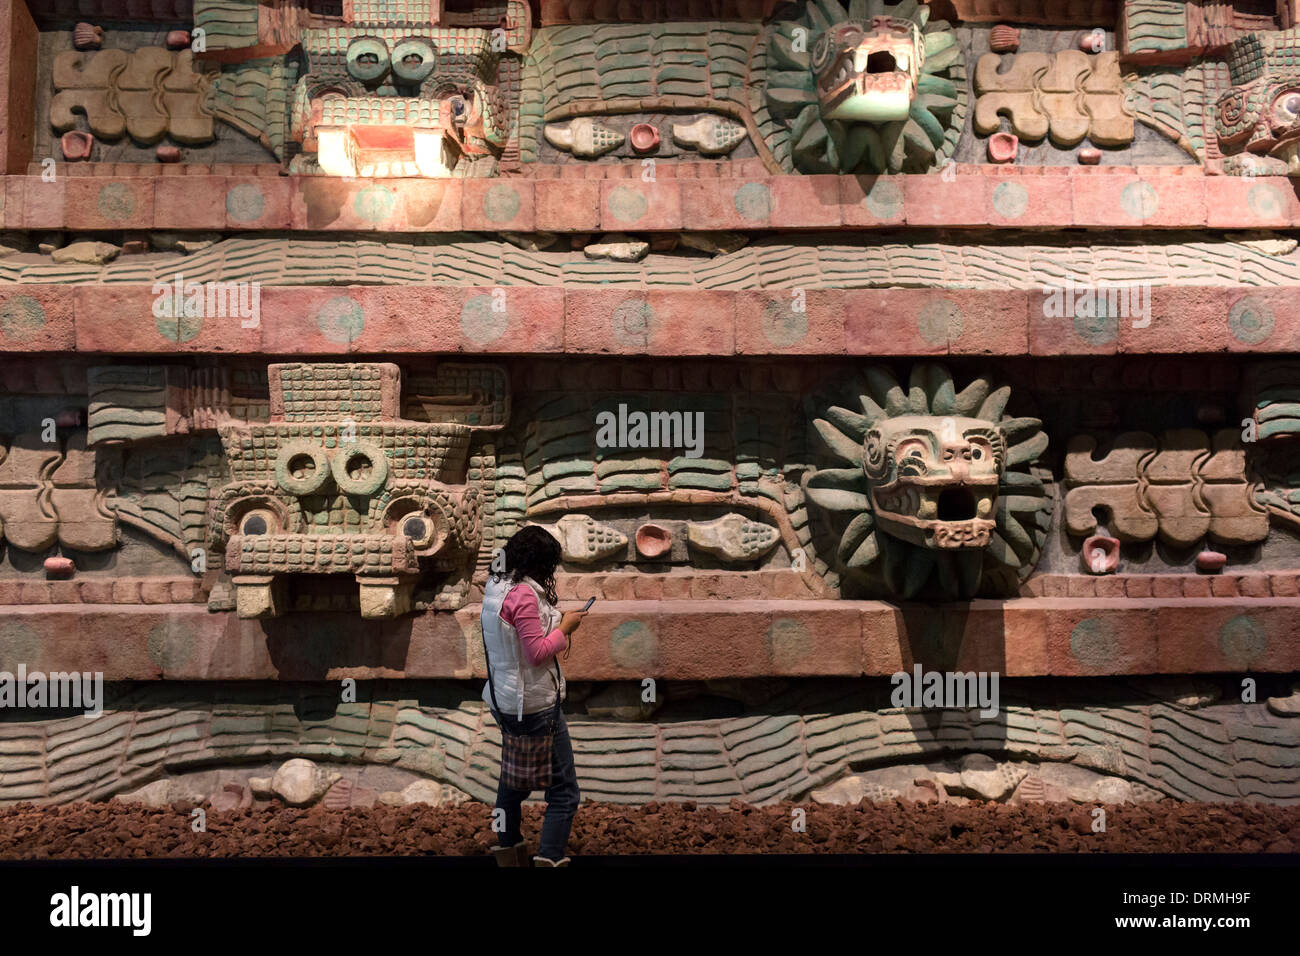 Aztec architecture, replica of the facade of the Temple of Quetzalcoatl in Teotihuacan. Stock Photo